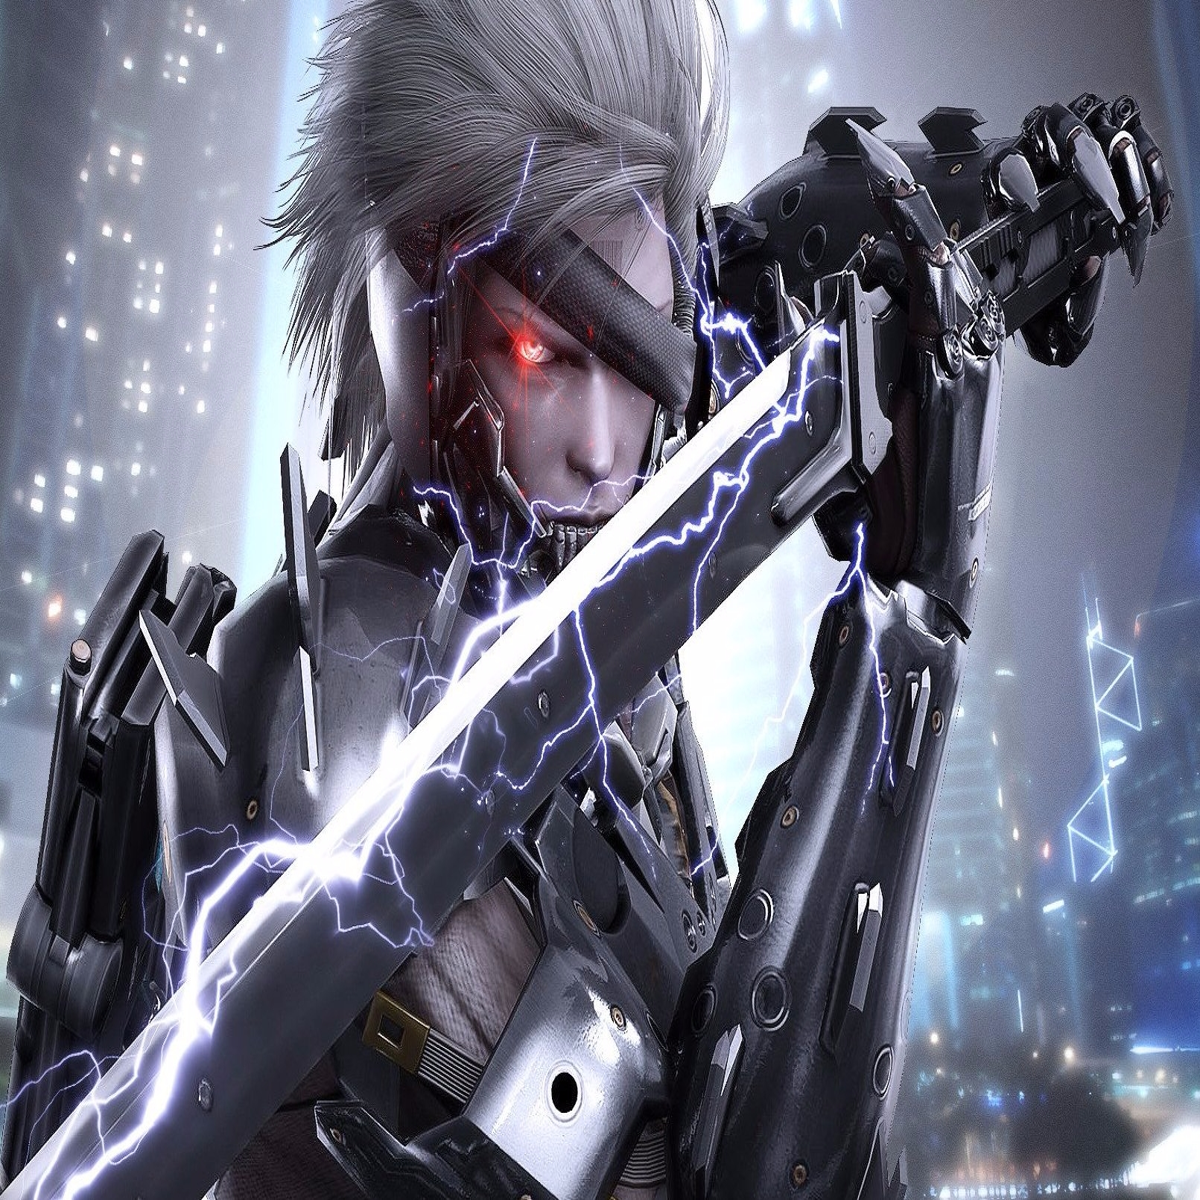 Metal Gear Rising: Revengeance Now Available On NVIDIA SHIELD